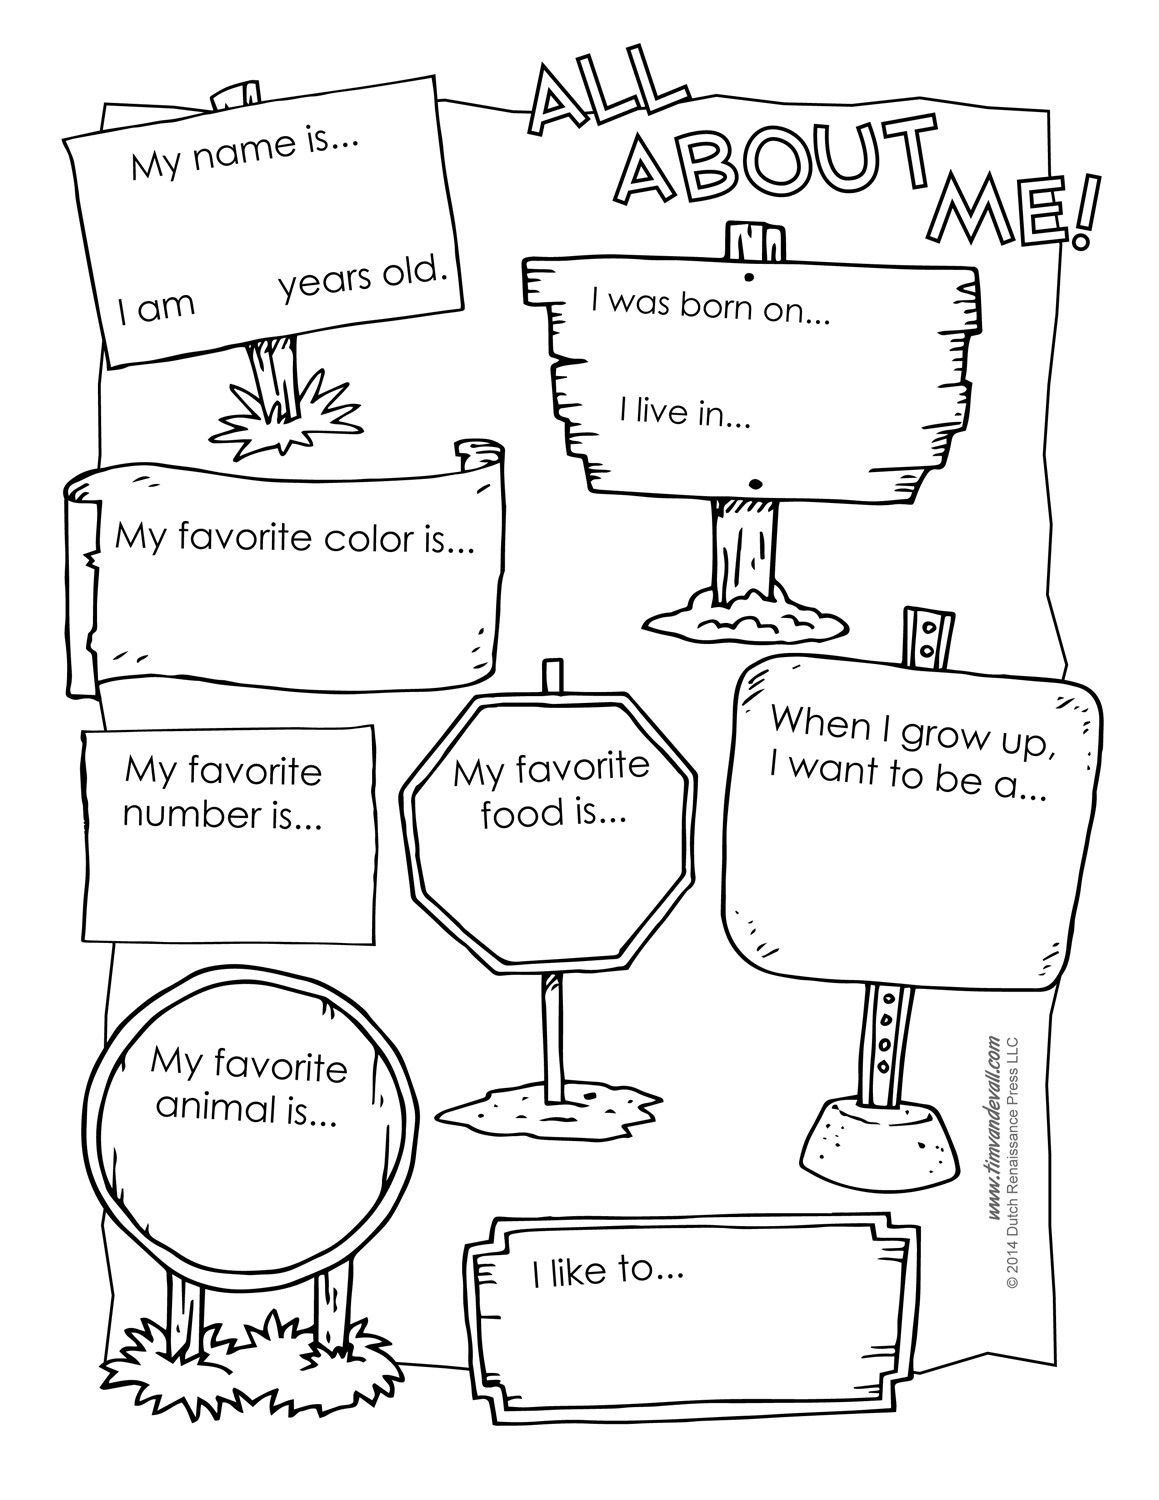 All About Me Preschool Template | 6 Best Images Of All About Me - All About Me Free Printable